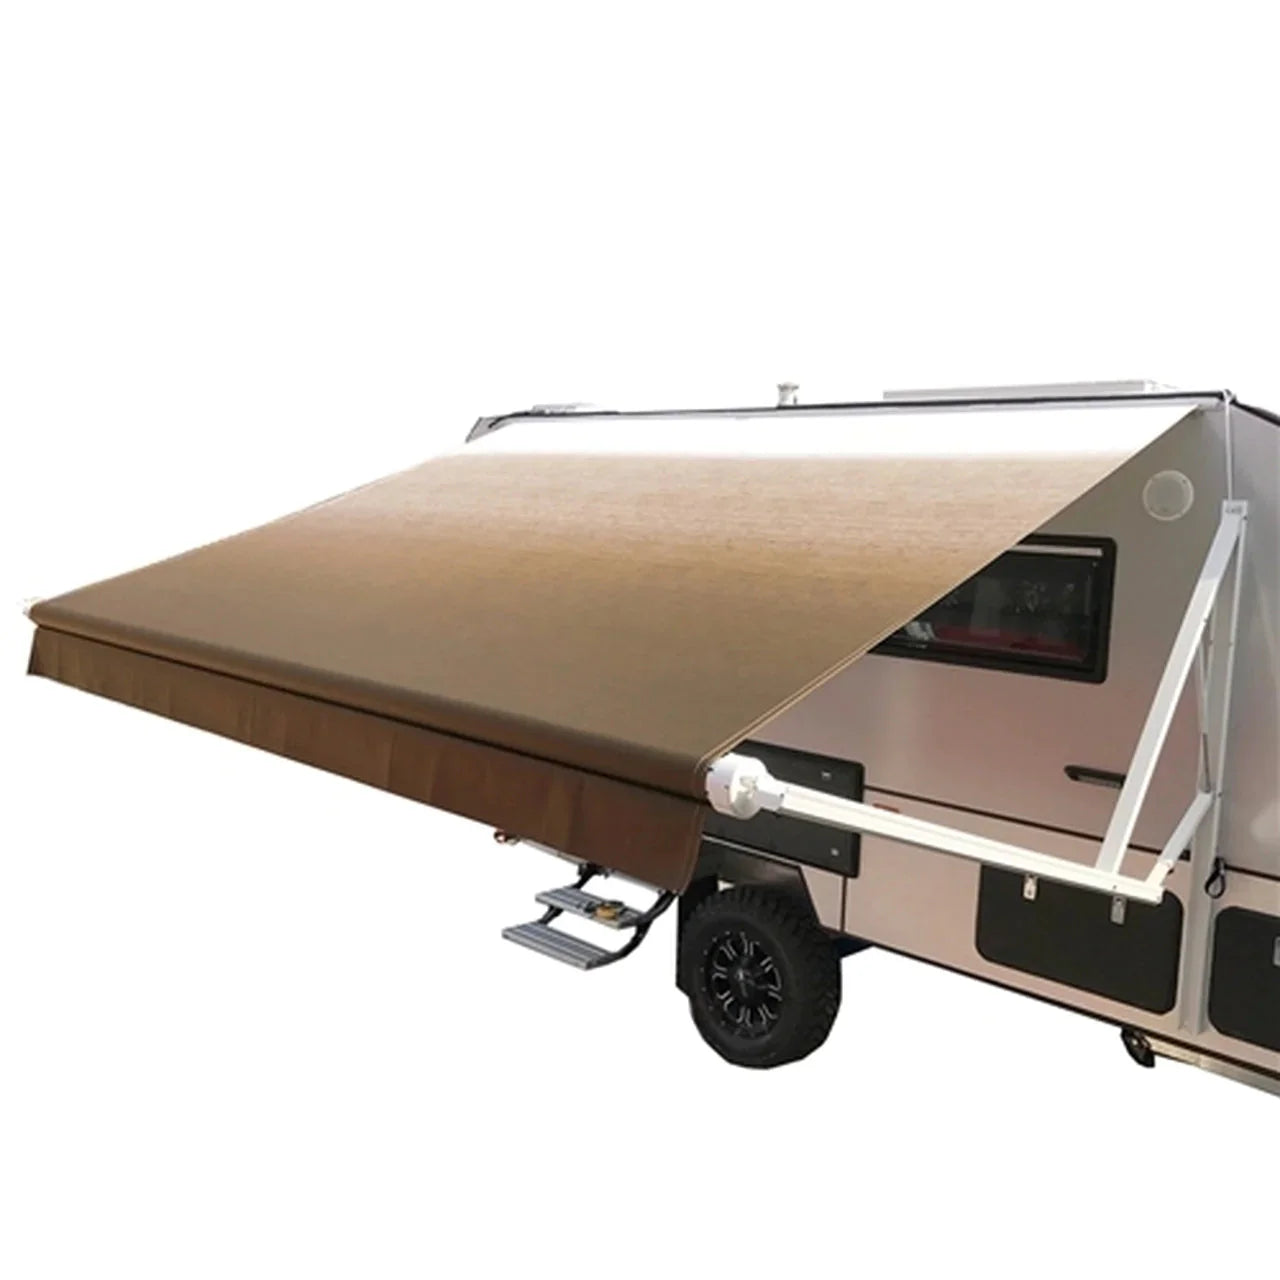 Aleko RV Awning Fabric Replacement - 8 X 8 ft (2.4 x 2.4 m)